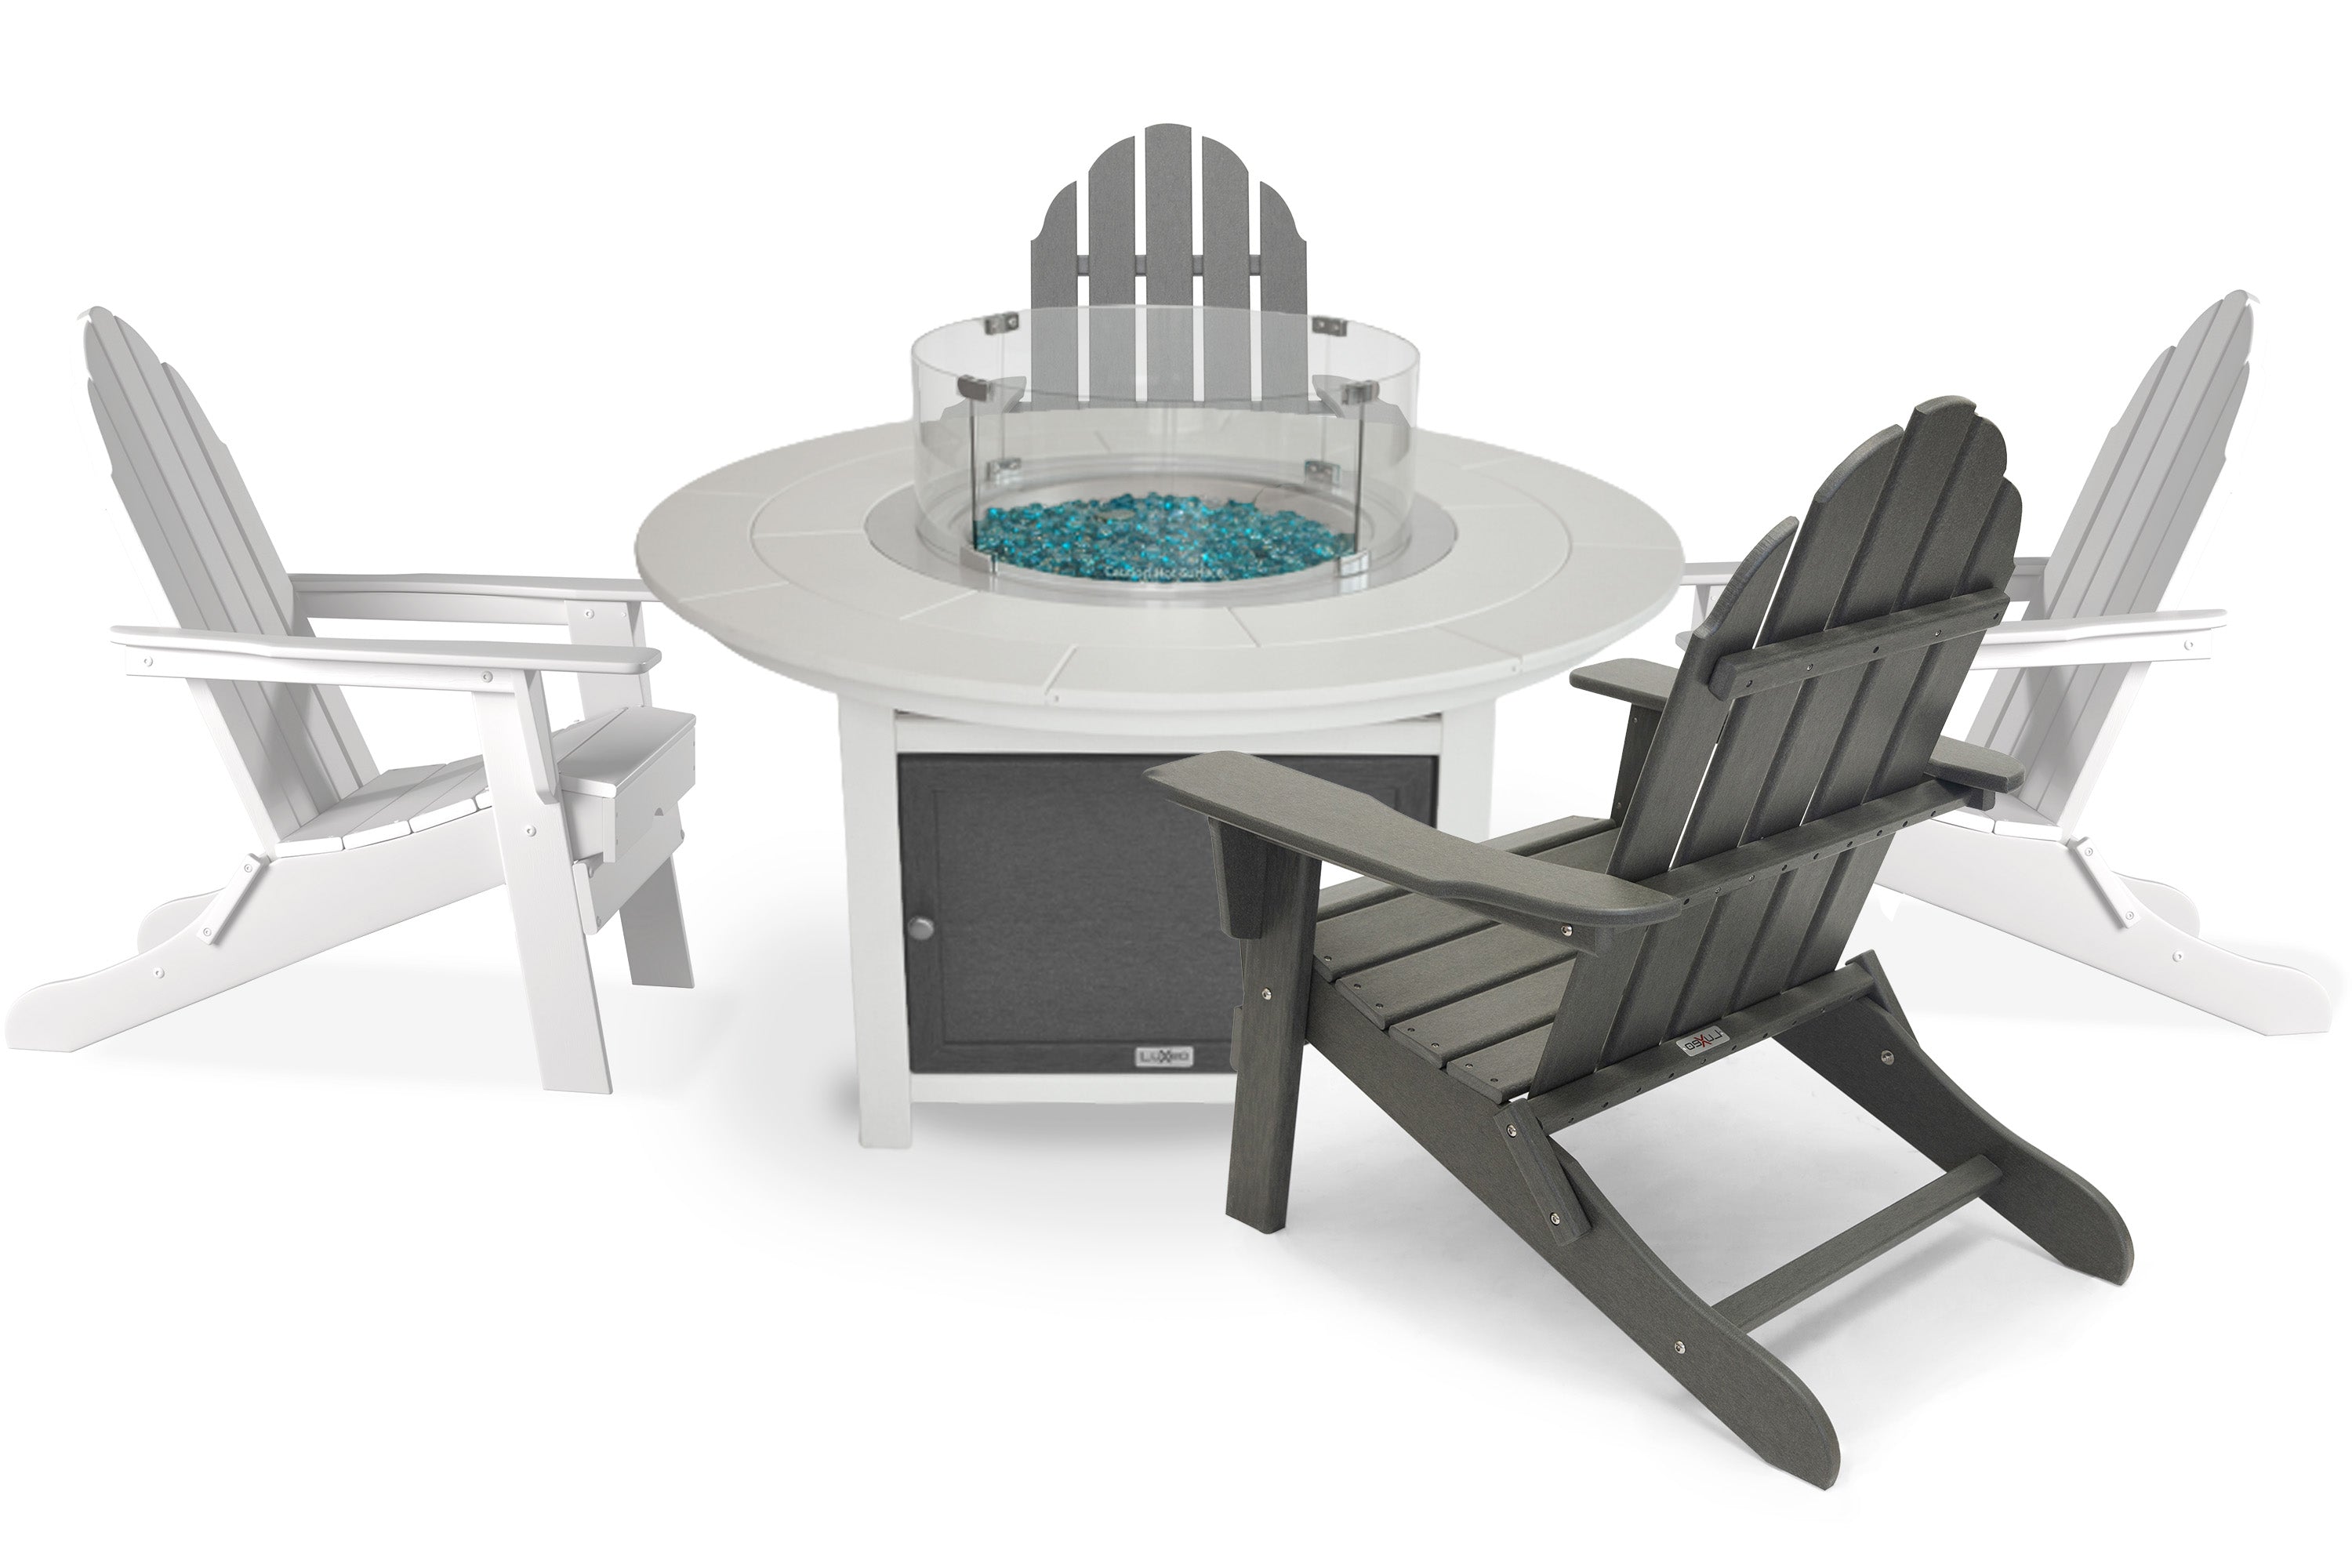 Vail 48" Two-Tone Fire Pit Table, Round Top with Four Balboa Chairs